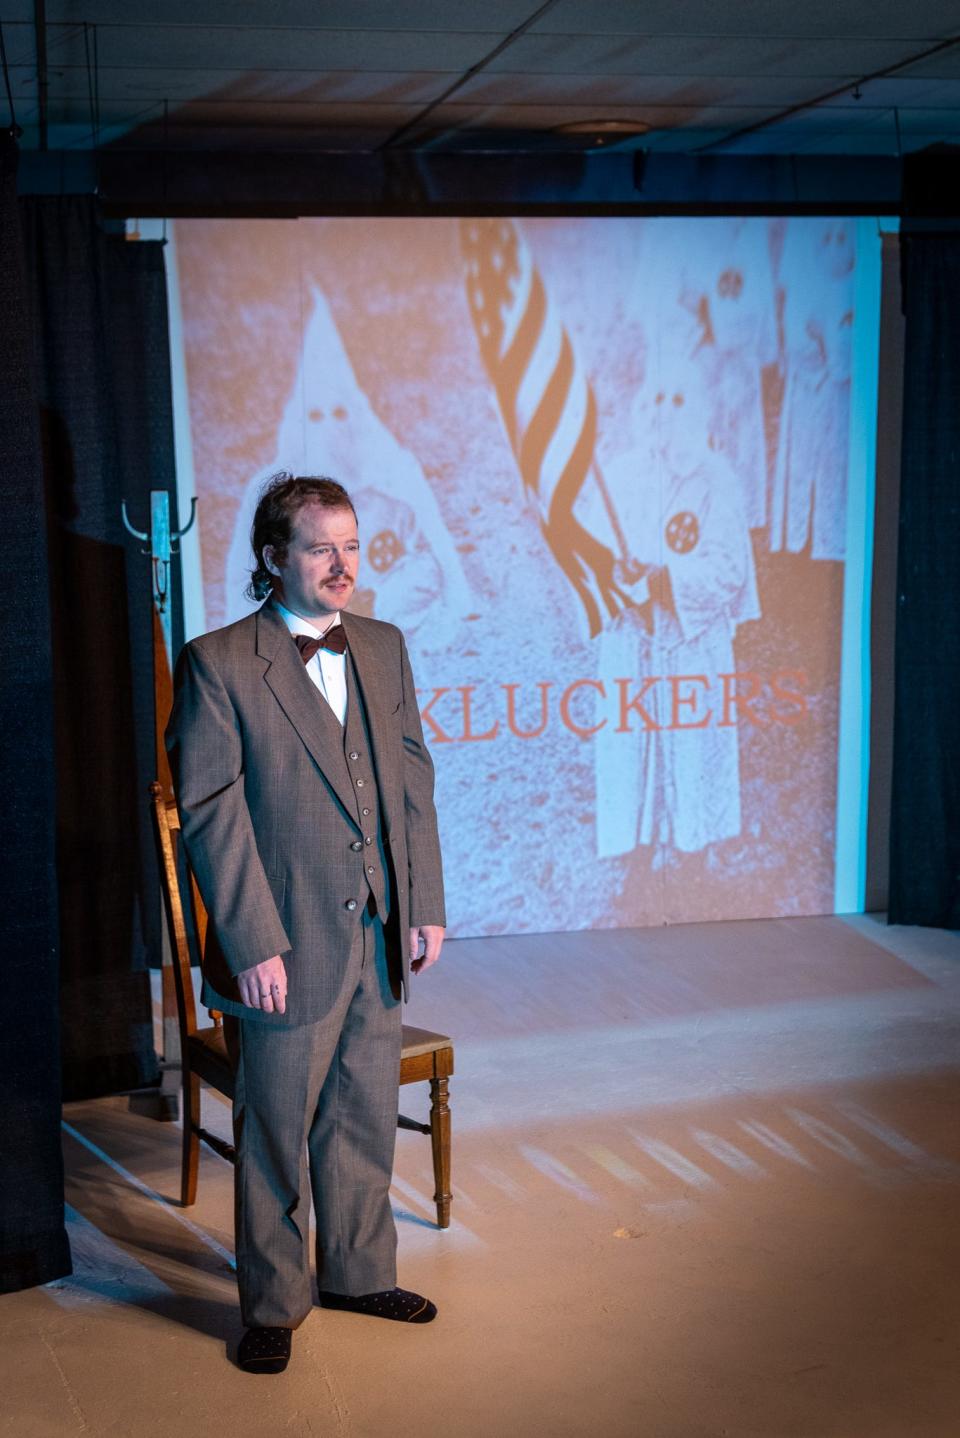 Tiemen Godwalt plays 1920s Indianapolis Times editor Boyd Gurley in “Kluckers: Indiana and the 1920’s Ku Klux Klan,” an original play by James Geisel produced by The Acting Ensemble and The History Museum with performances May 19 to June 4, 2022, at both organizations.